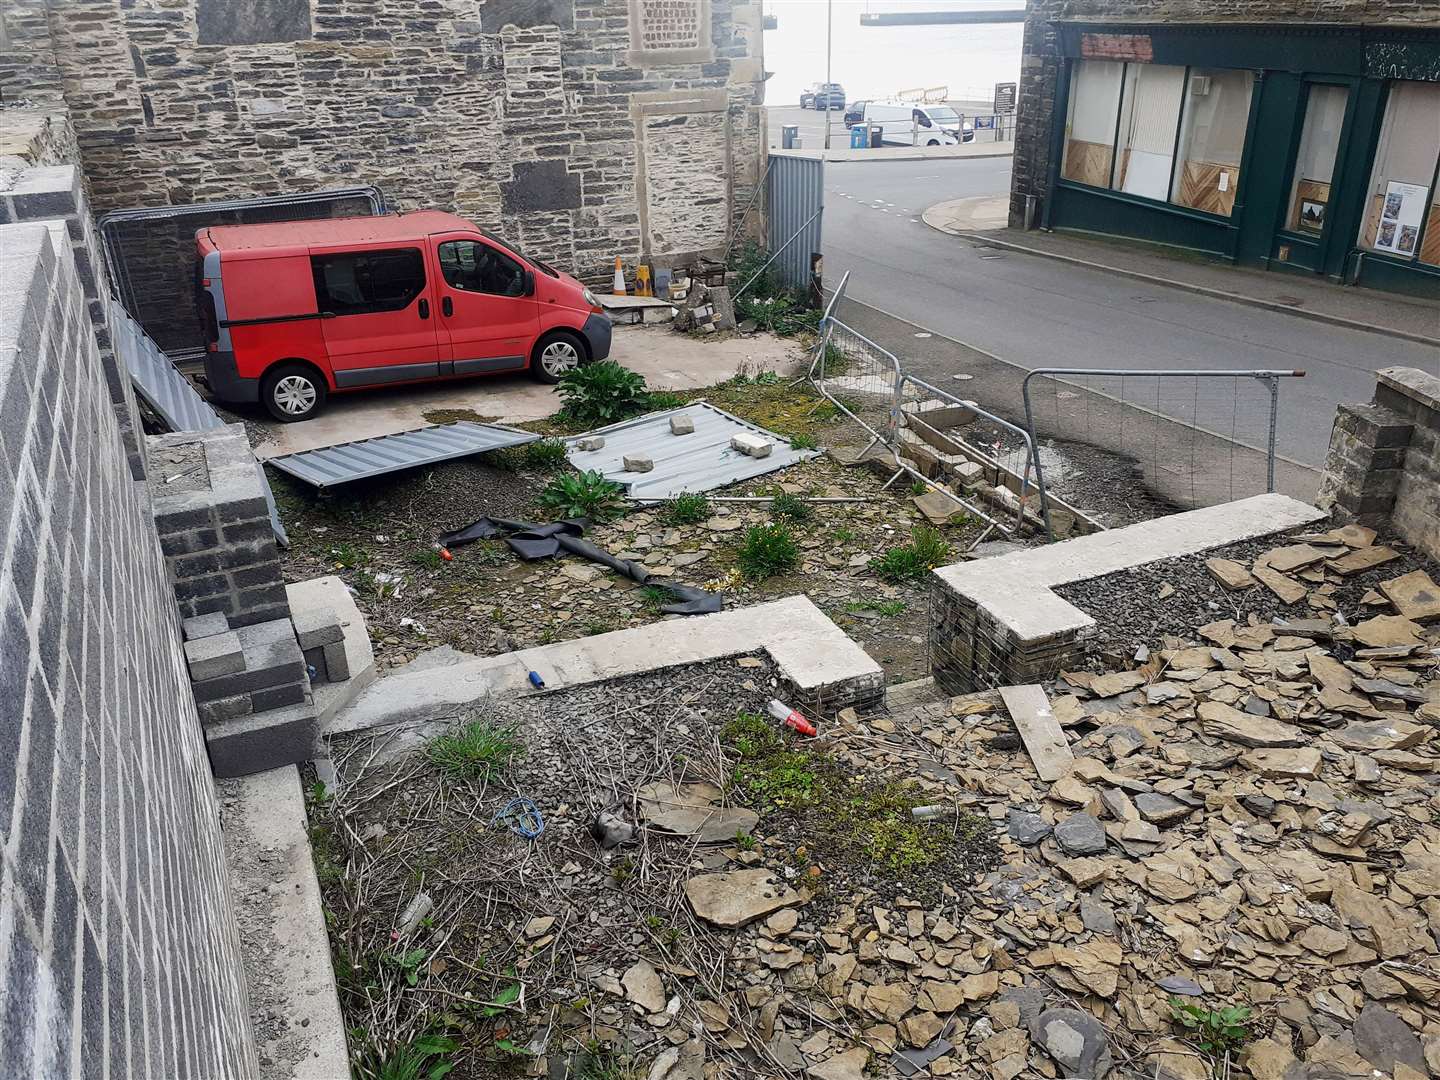 Wick community councillors expressed concern about the state of the former Sloans shop site beside the Camps Bar.